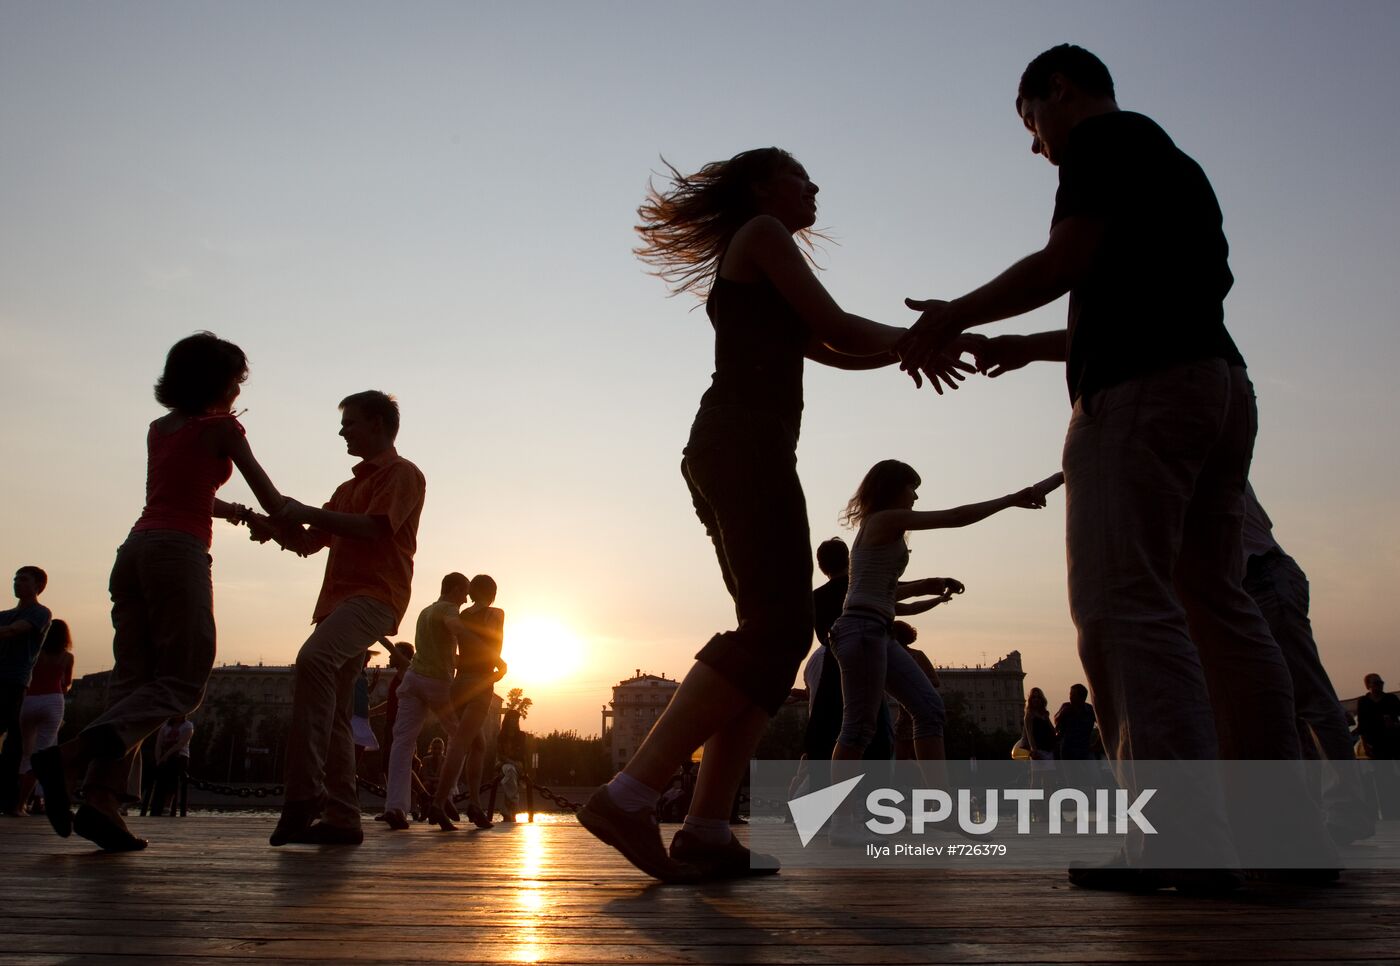 Enthusiasts engage in street dancing in Moscow